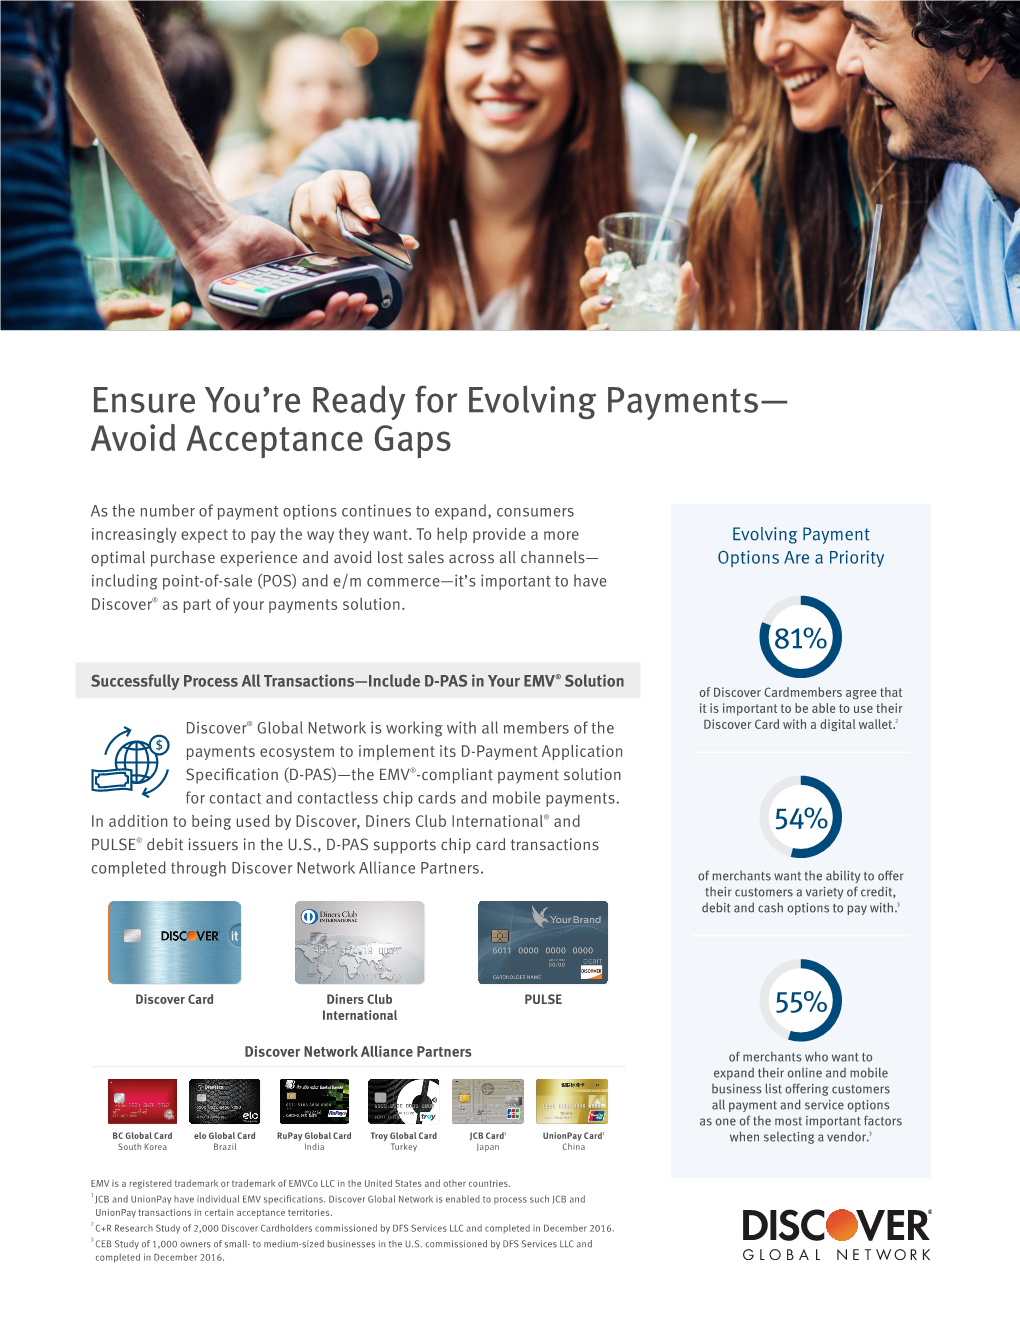 Ensure You're Ready for Evolving Payments— Avoid Acceptance Gaps